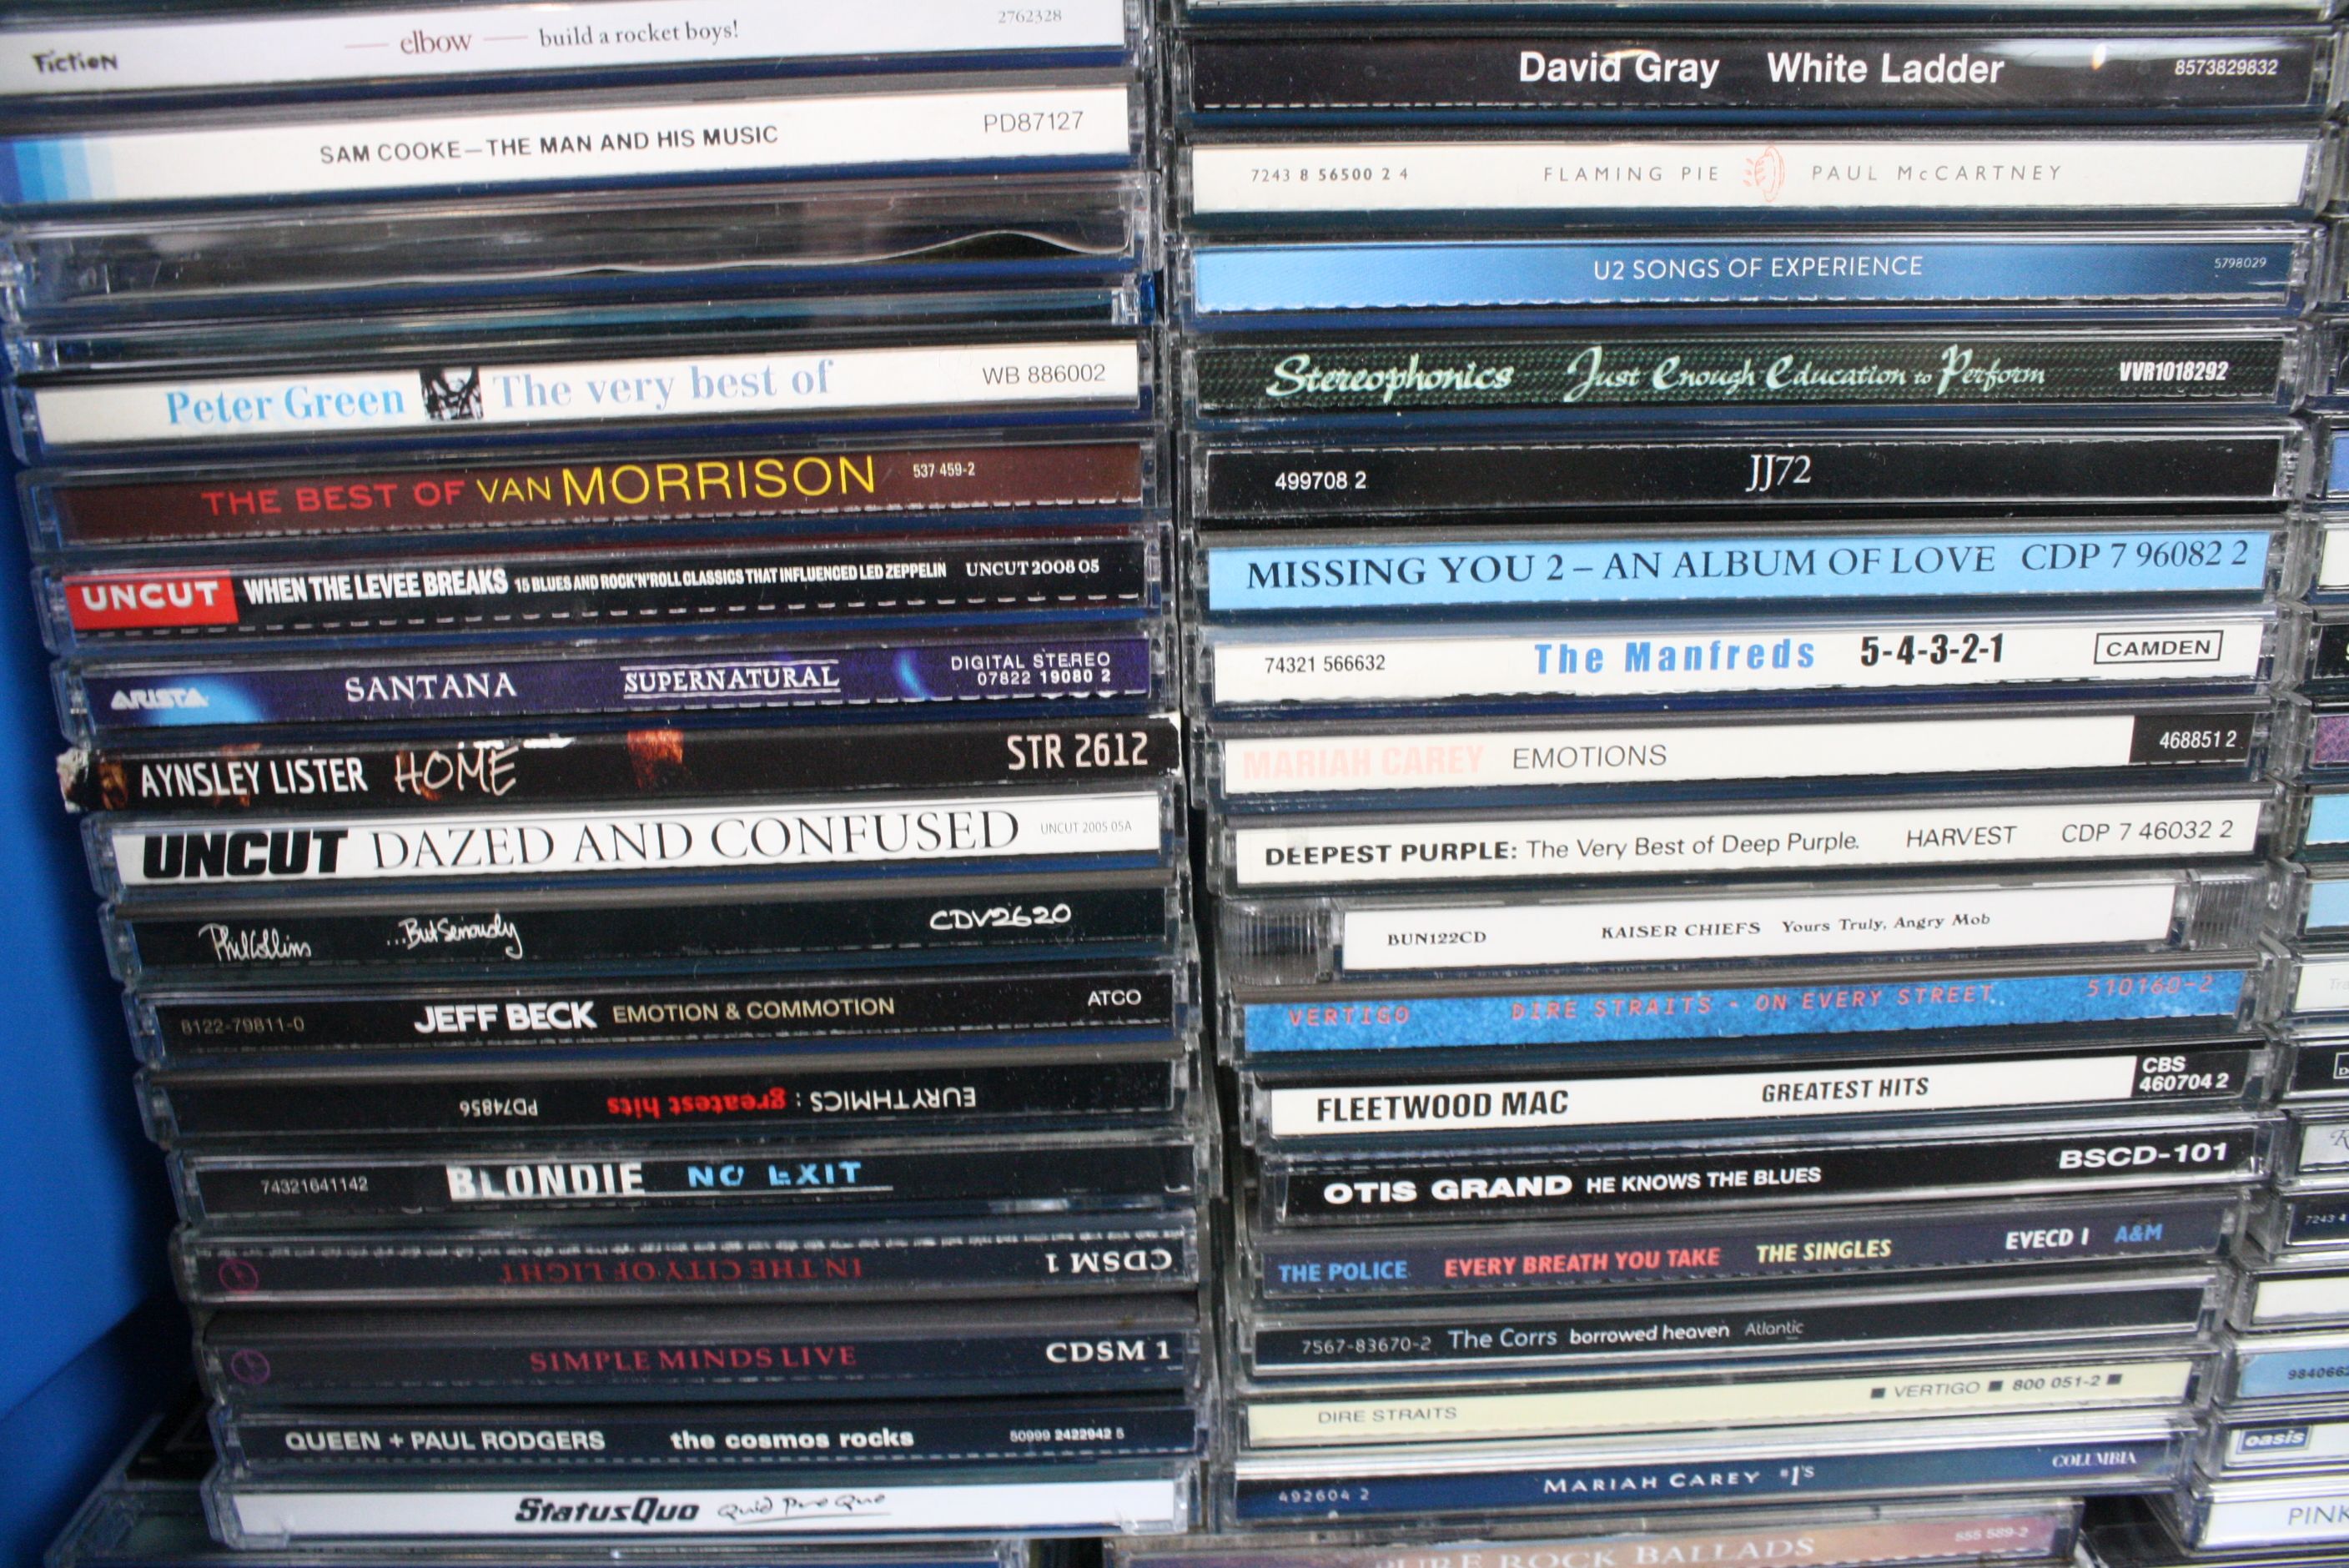 CDs / DVDs - Approx 100 CDs and 6 DVDs to include Dire Straits, Led Zeppelin (2 DVDs), Coldplay, - Image 4 of 10